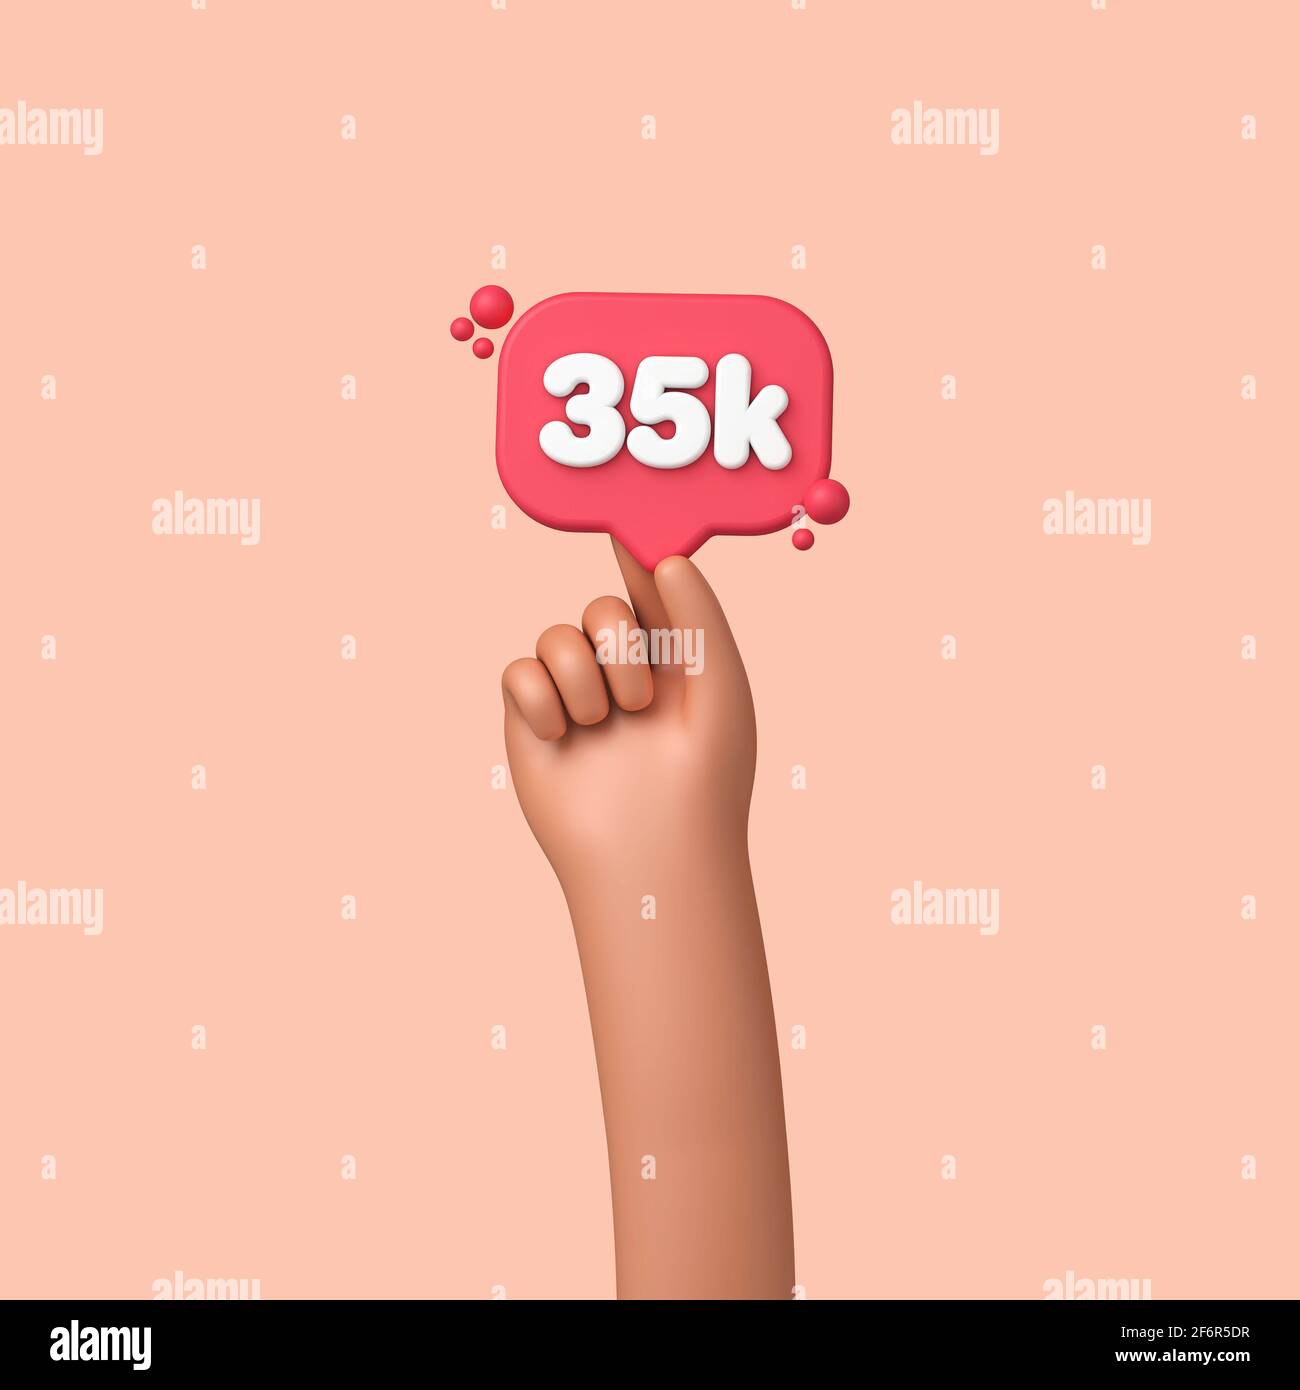 Hand holding a 35k social media followers banner label. 3D Rendering Stock Photo